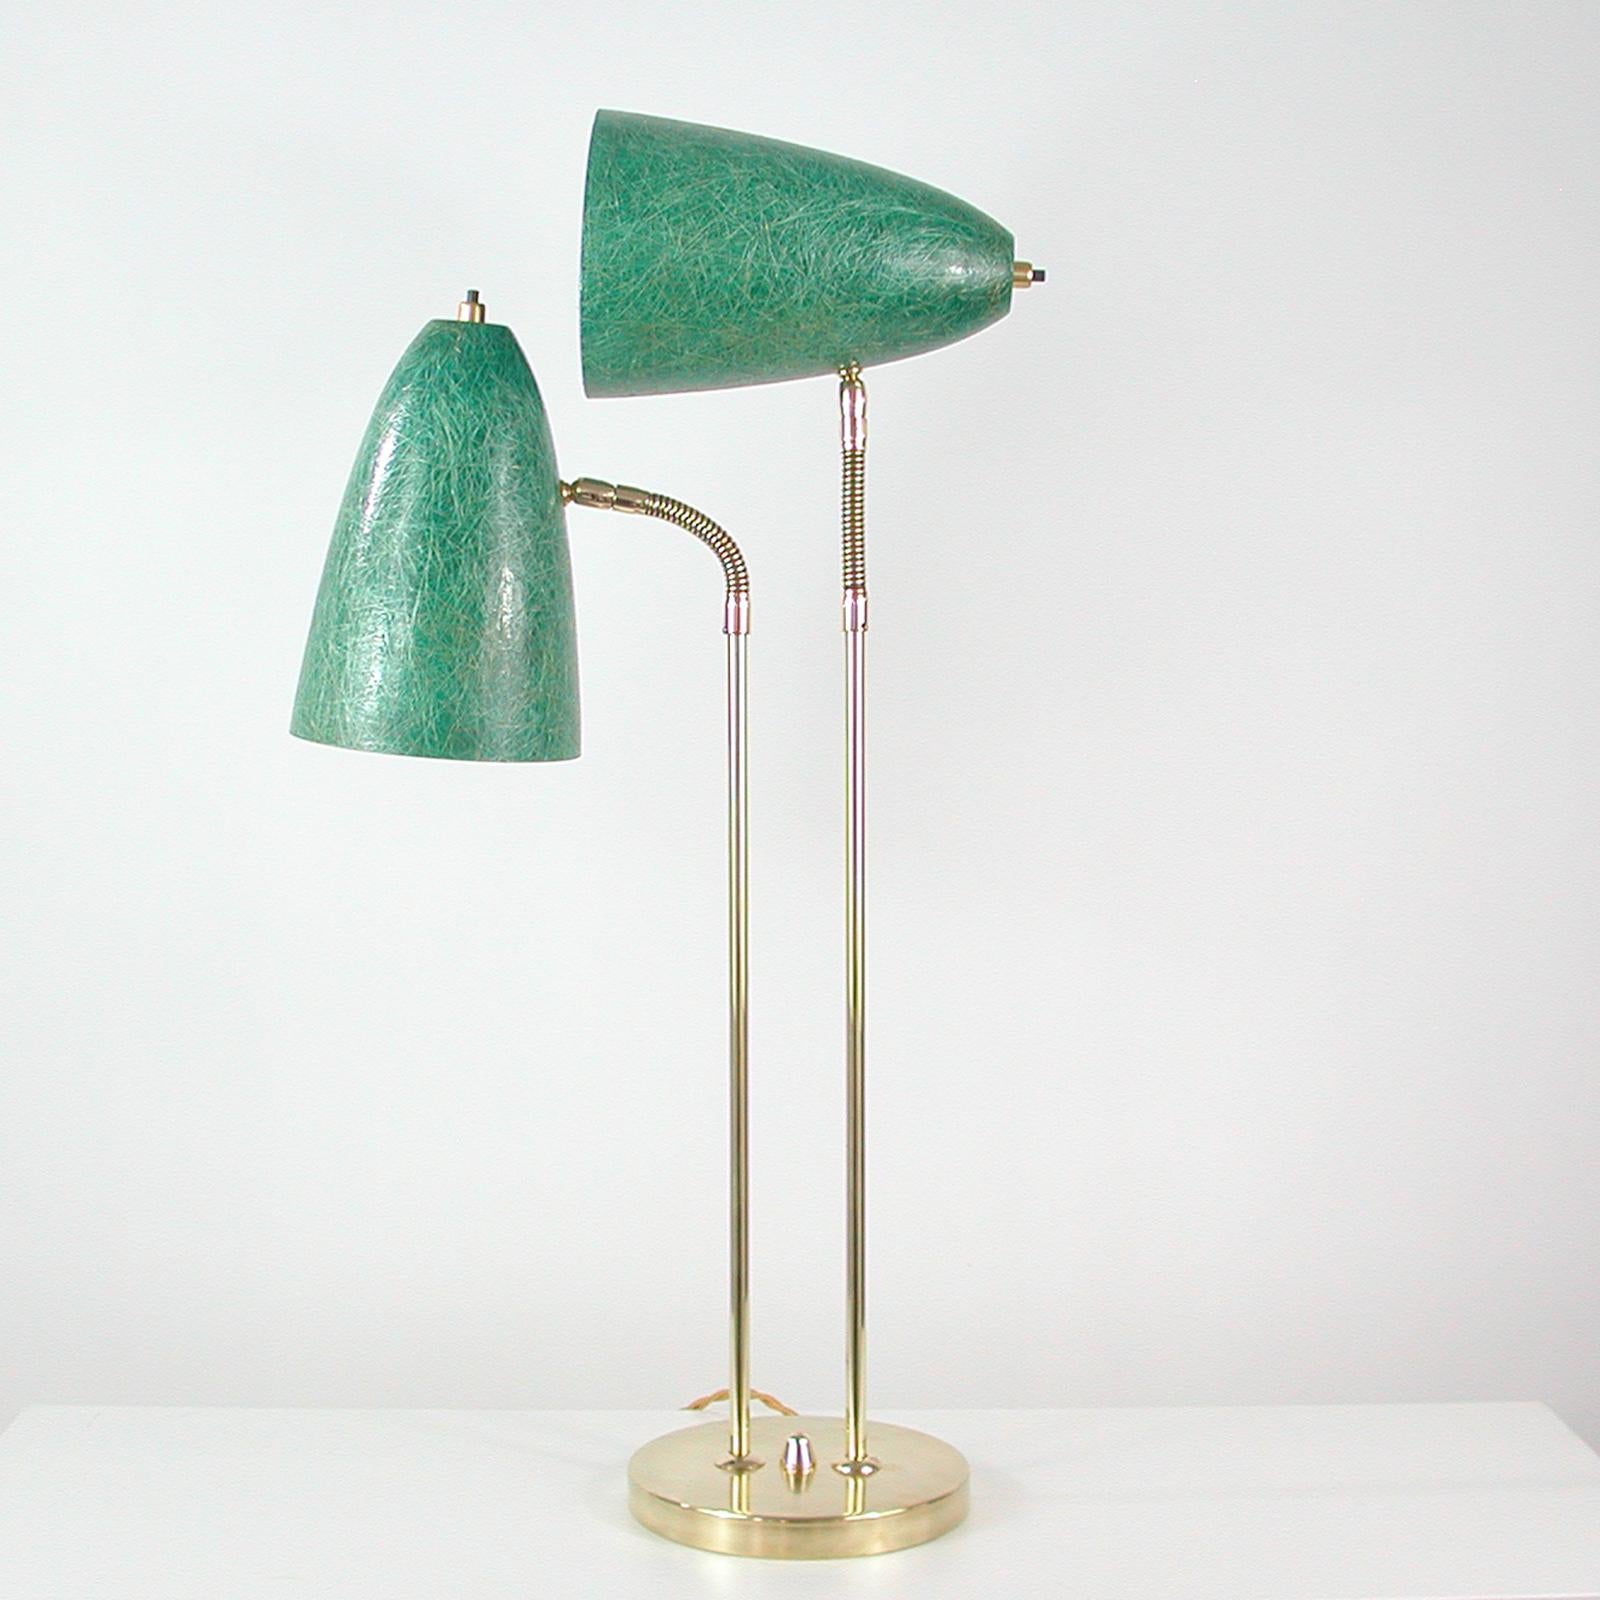 This unusual desk lamp was designed and manufactured in Sweden in the 1950s. It features a brass lamp base, brass lamp rods and two adjustable cone shaped lamp shades made of green fiberglass. The lamp shades can be turned in any possible direction.